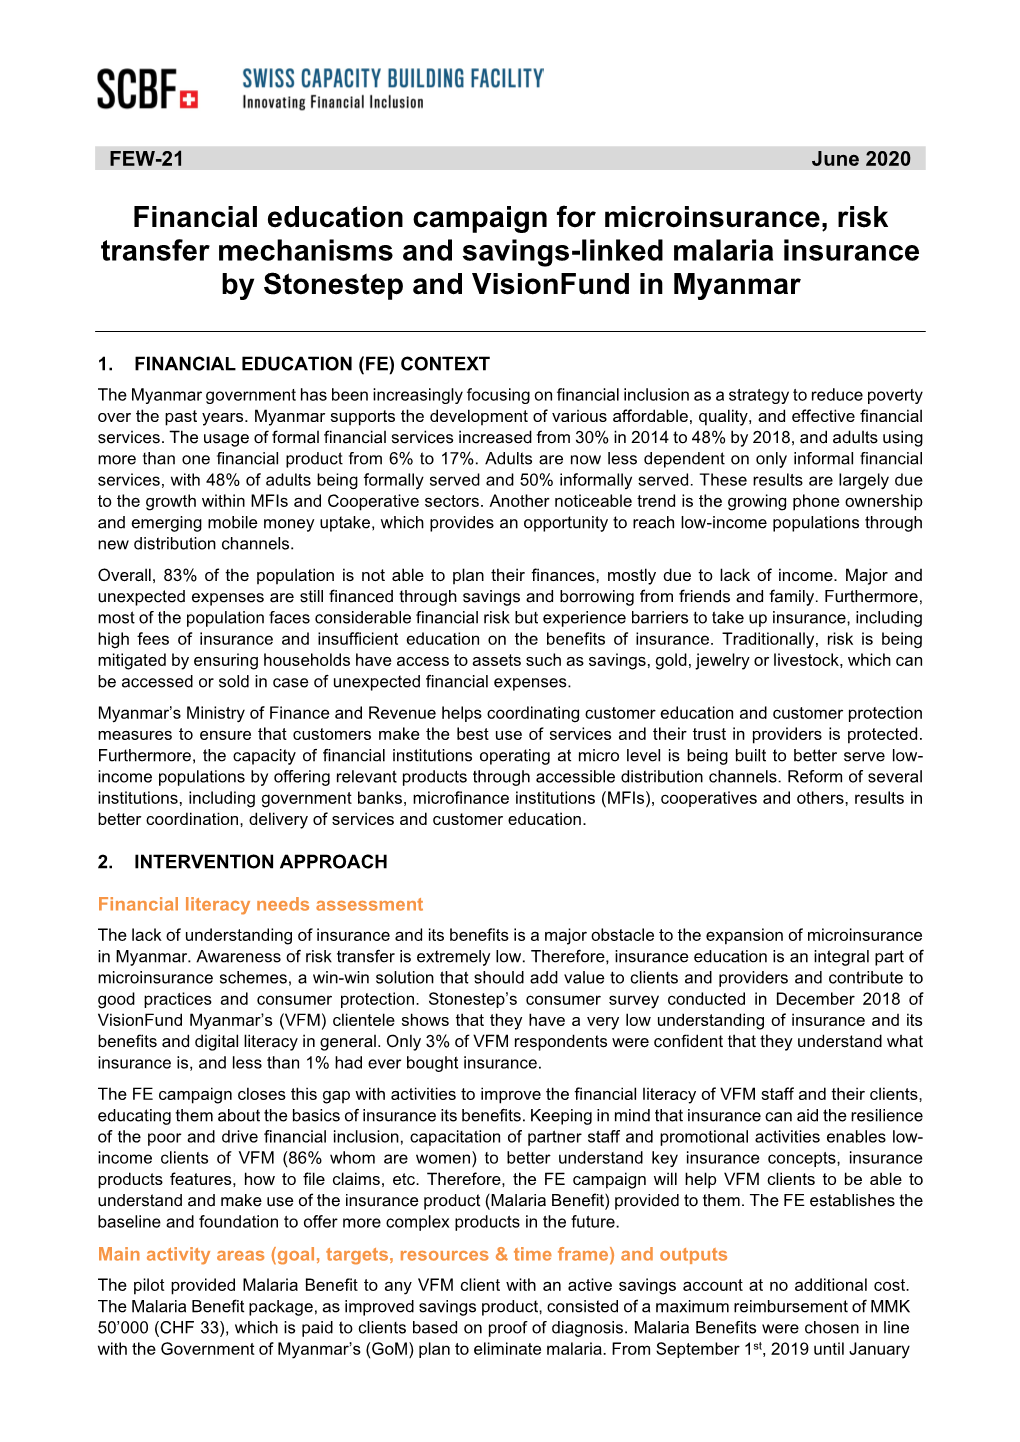 Financial Education Campaign for Microinsurance, Risk Transfer Mechanisms and Savings-Linked Malaria Insurance by Stonestep and Visionfund in Myanmar